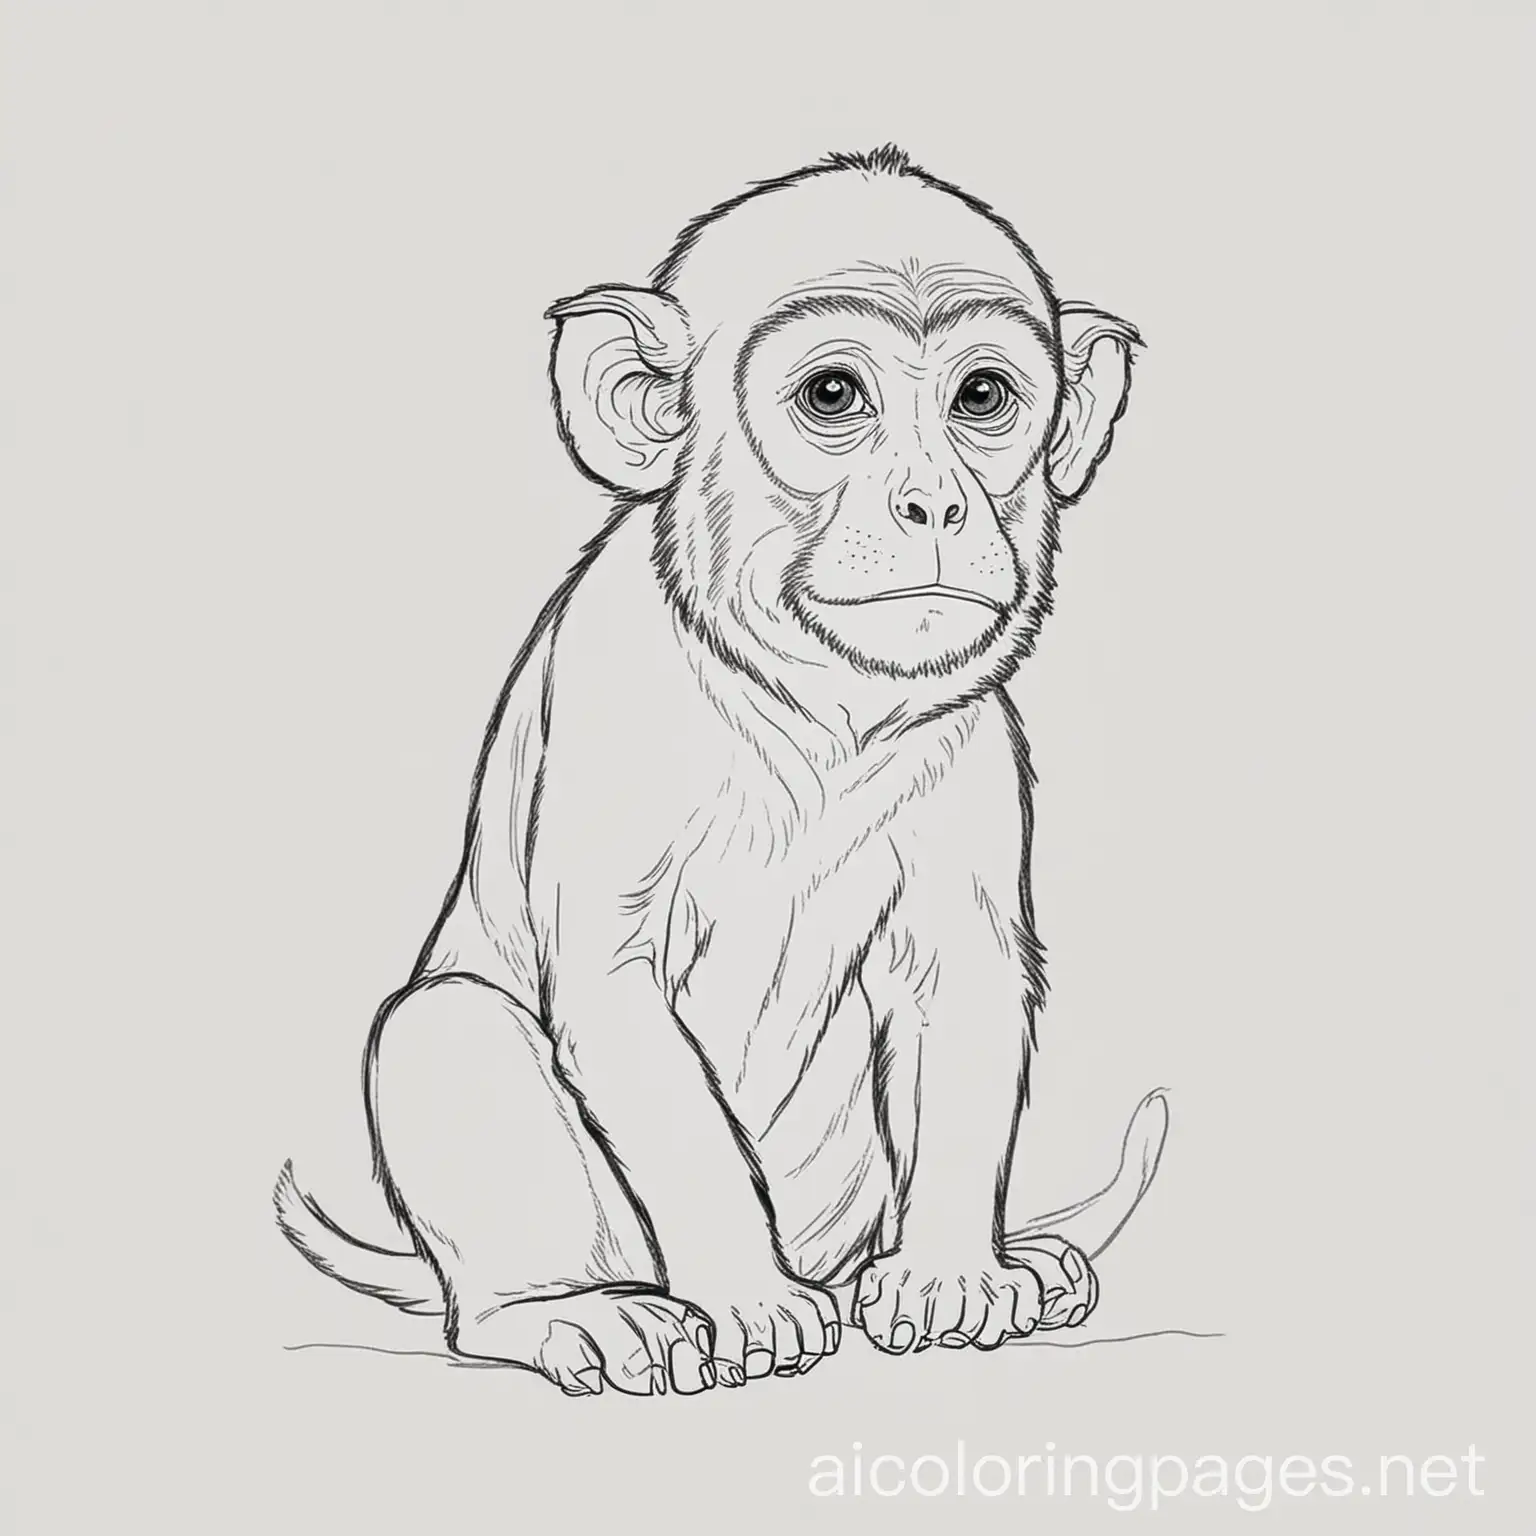 pig tailed-macaque, Coloring Page, black and white, line art, white background, Simplicity, Ample White Space. The background of the coloring page is plain white to make it easy for young children to color within the lines. The outlines of all the subjects are easy to distinguish, making it simple for kids to color without too much difficulty, Coloring Page, black and white, line art, white background, Simplicity, Ample White Space. The background of the coloring page is plain white to make it easy for young children to color within the lines. The outlines of all the subjects are easy to distinguish, making it simple for kids to color without too much difficulty